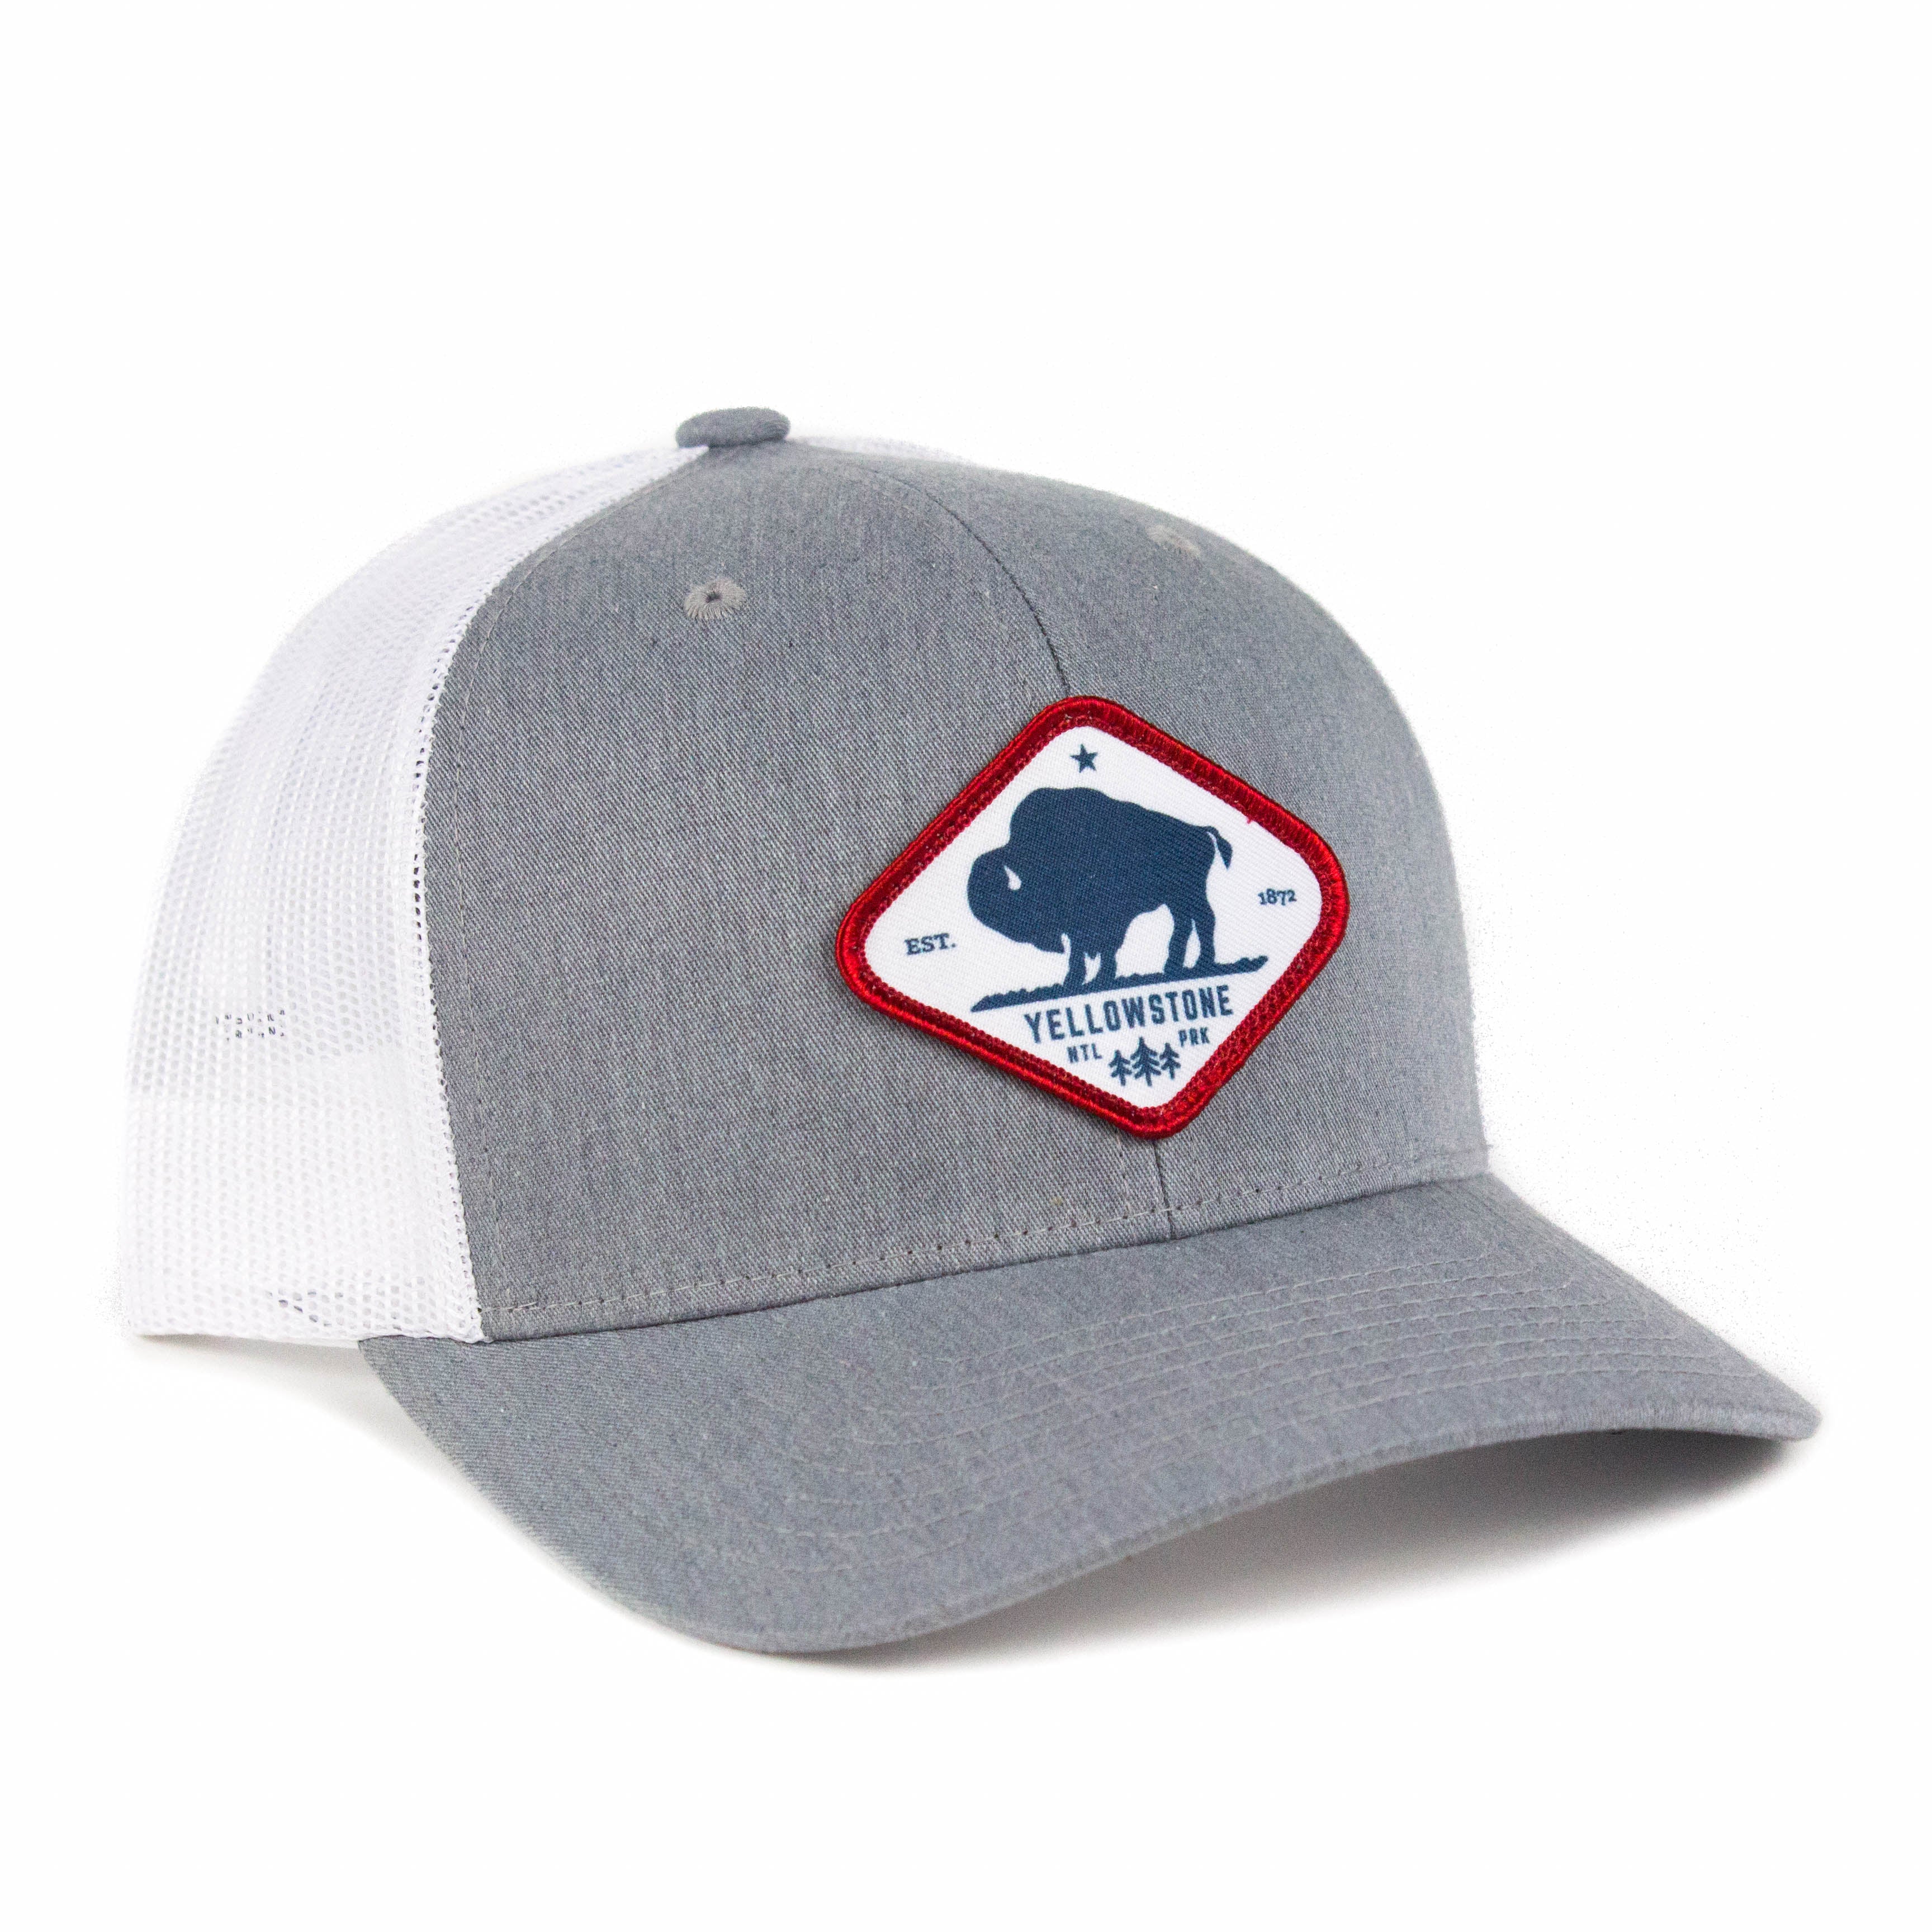 Yellowstone National Park Trucker Hat | TriPine | Reviews on Judge.me